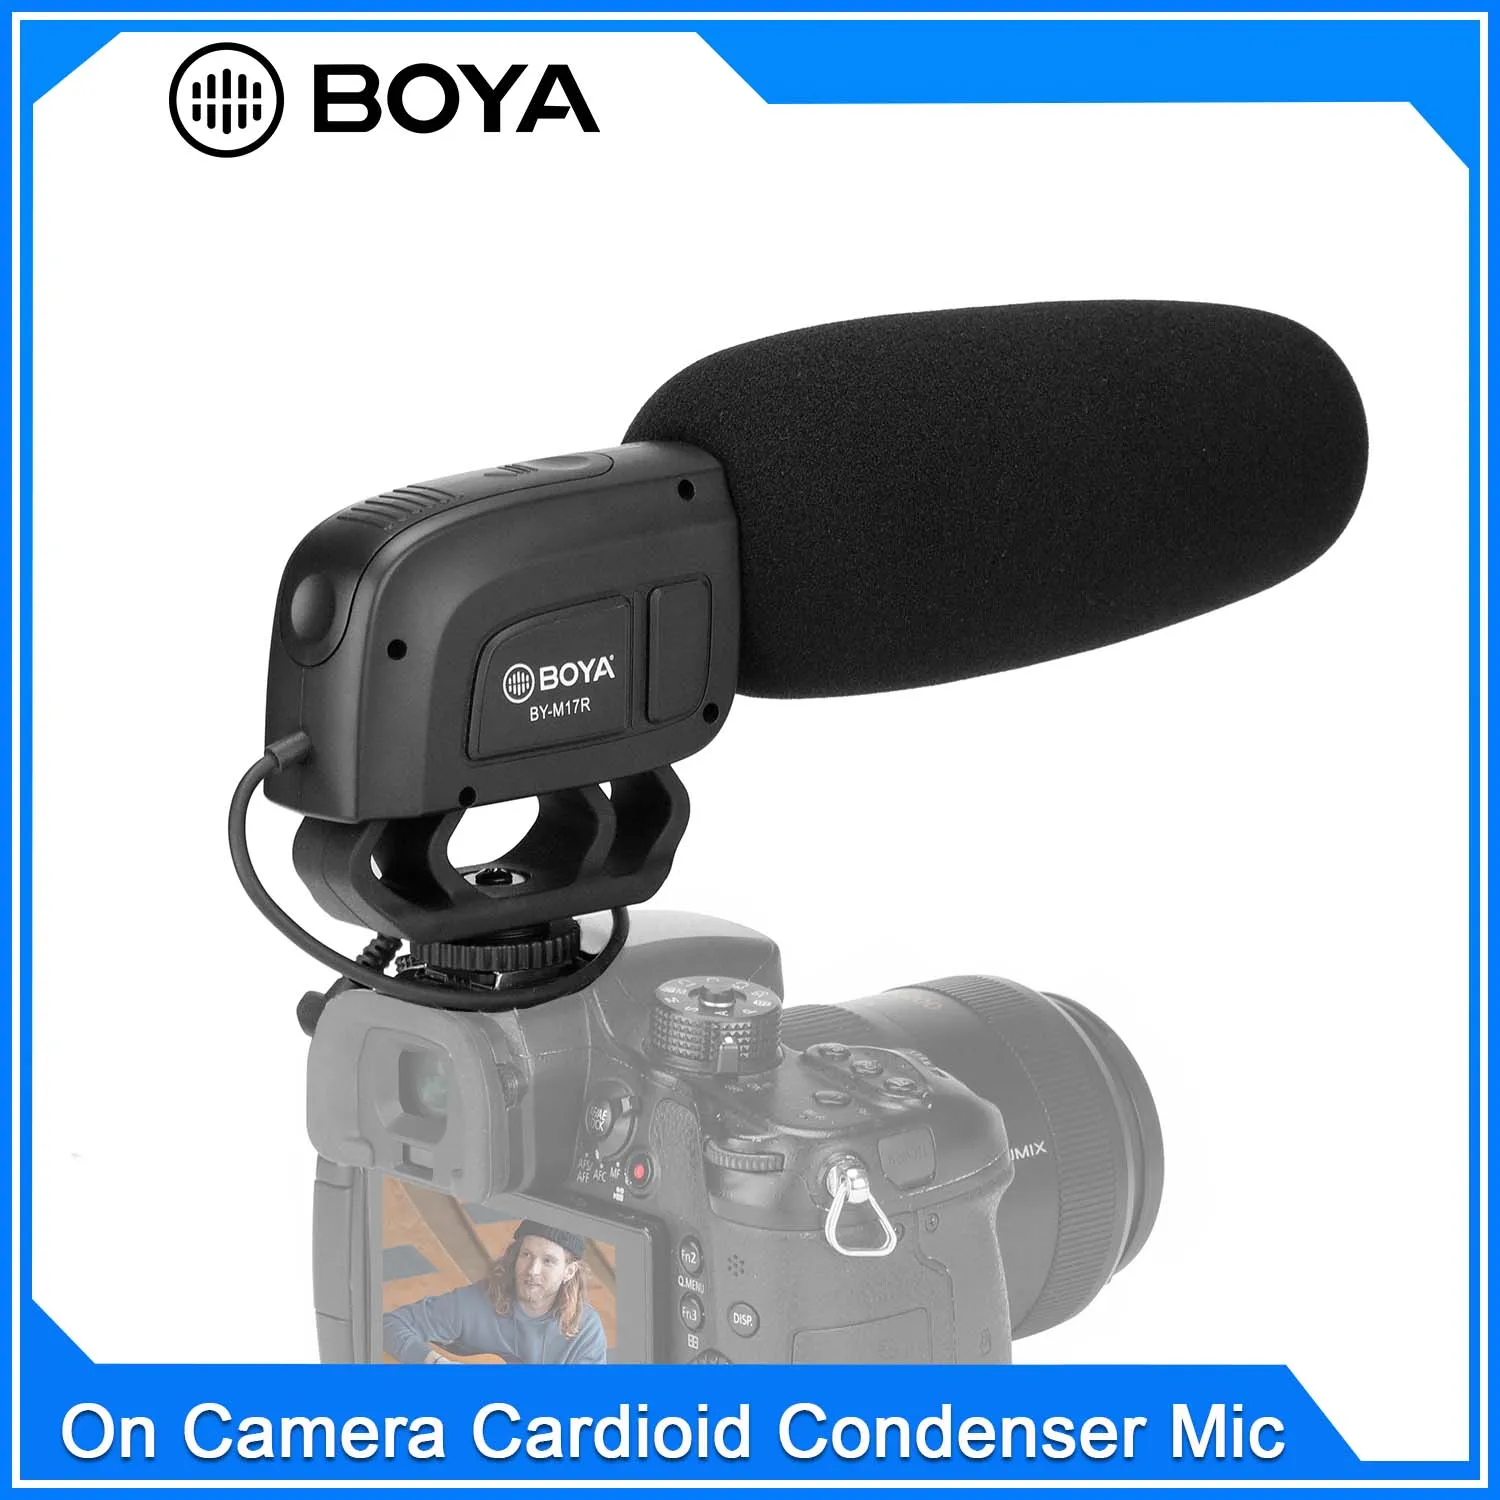 

BOYA BY-M17R On Camera Cardioid Condenser Microphone Audio Video Mic for Camera DSLR PC Smartphone Live Streaming Vlog